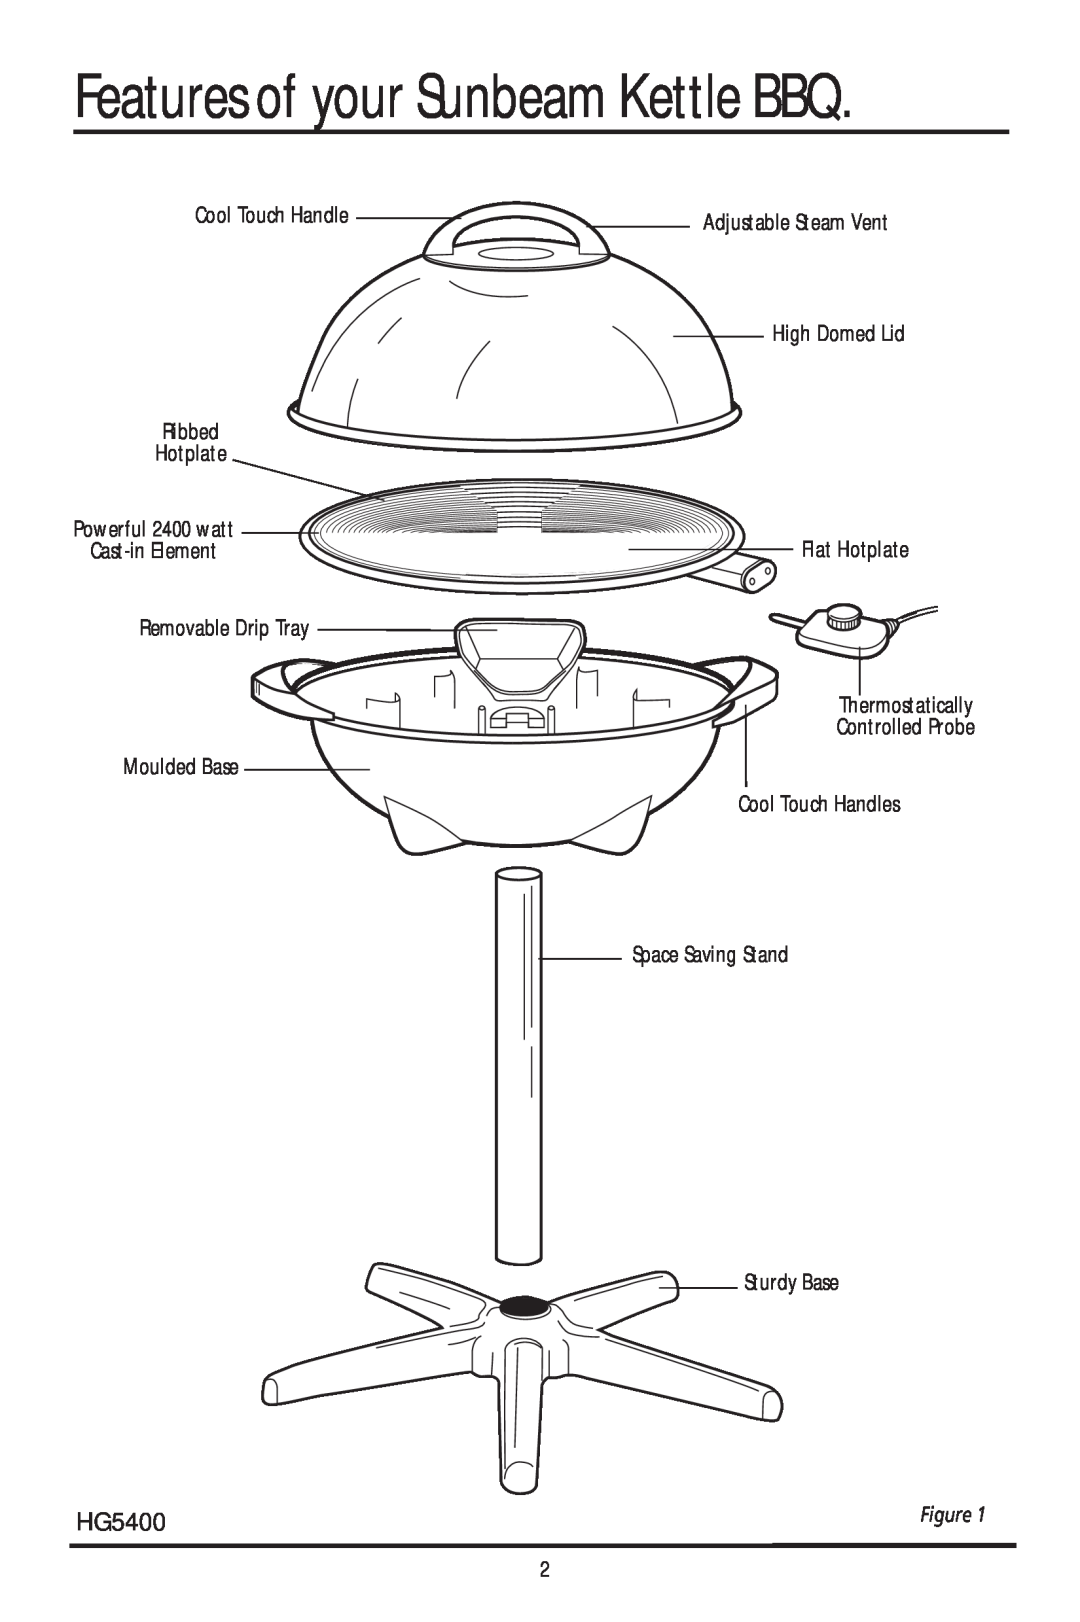 Sunbeam HG5400 manual Features of your Sunbeam Kettle BBQ 